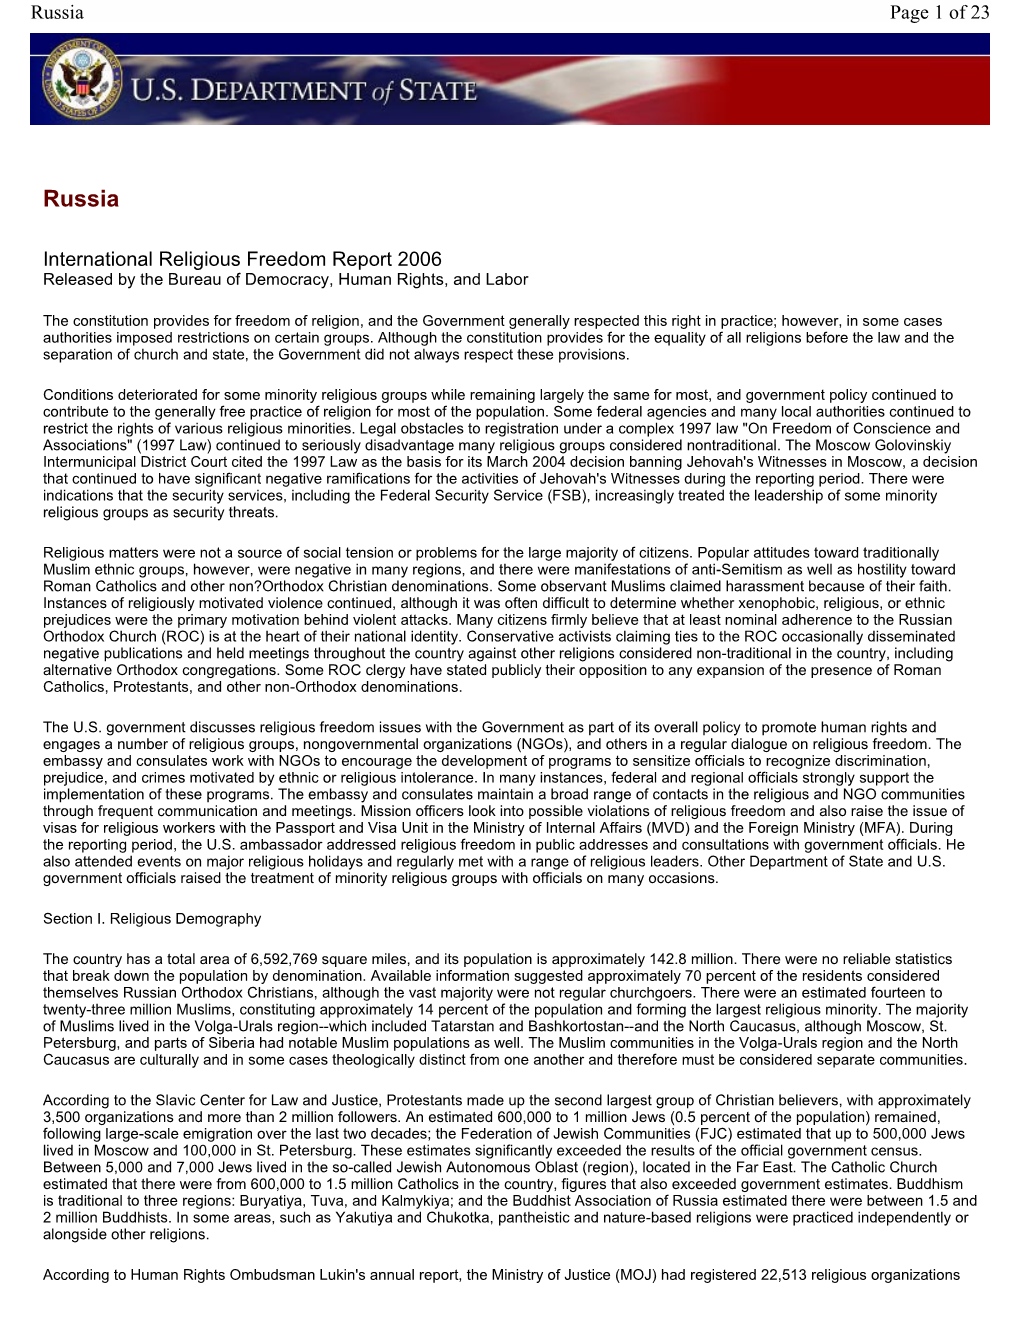 Report on International Religious Freedom 2006: Russia